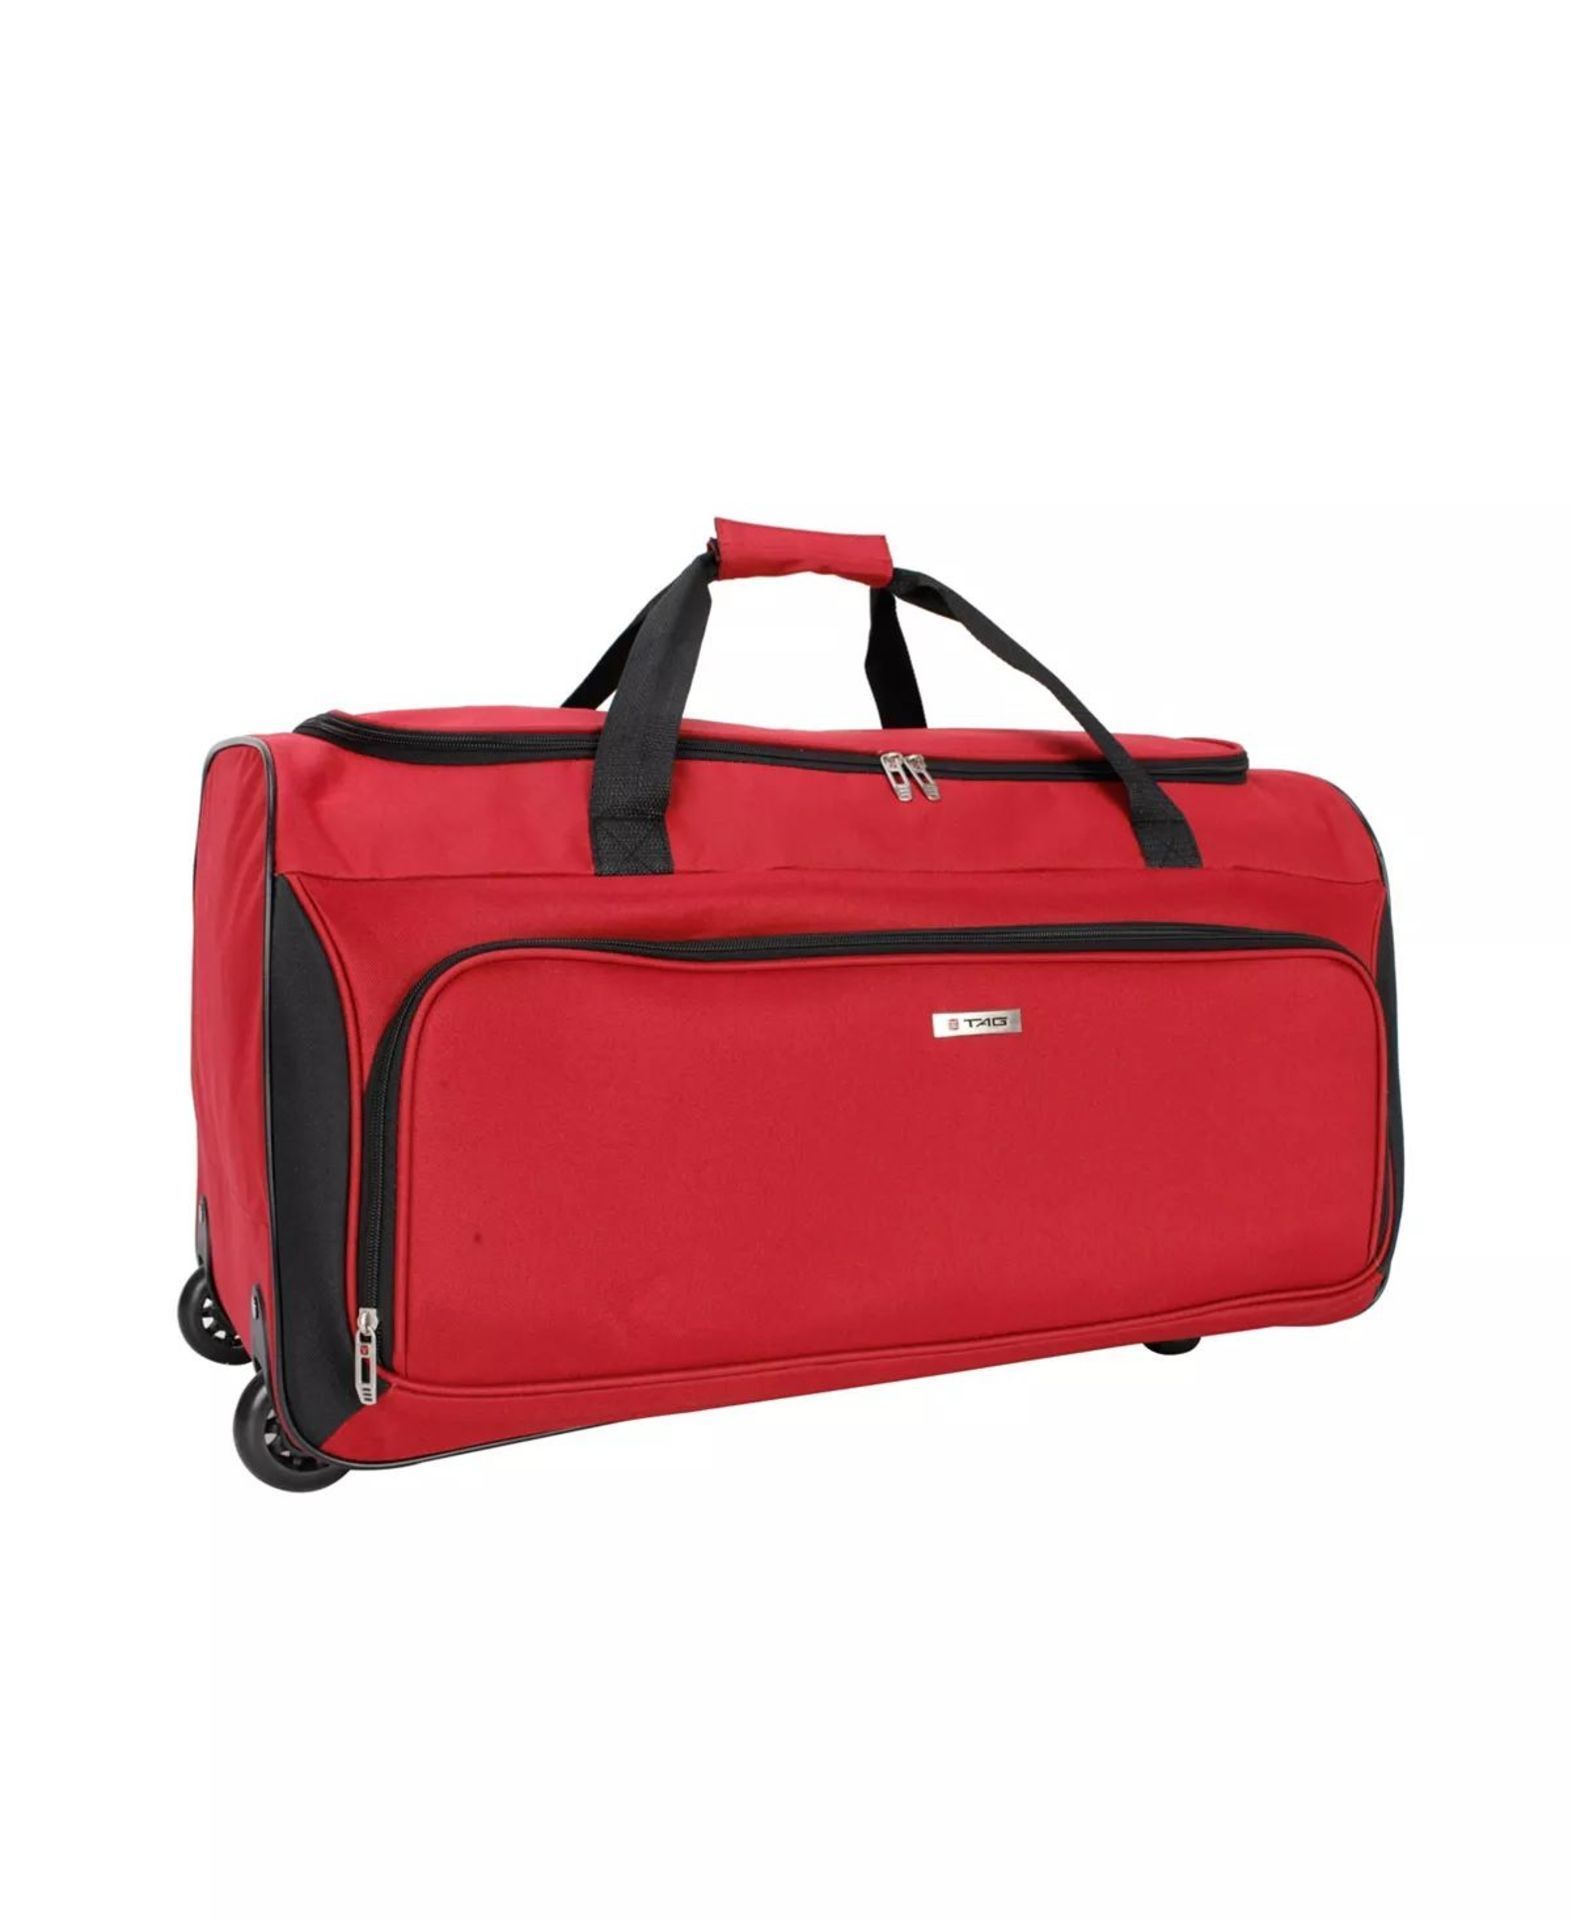 3 X NEW SETS OF TAG Ridgefield RED 5 Piece Softside Luggage Sets. RRP $300 per set, giving this - Image 4 of 5